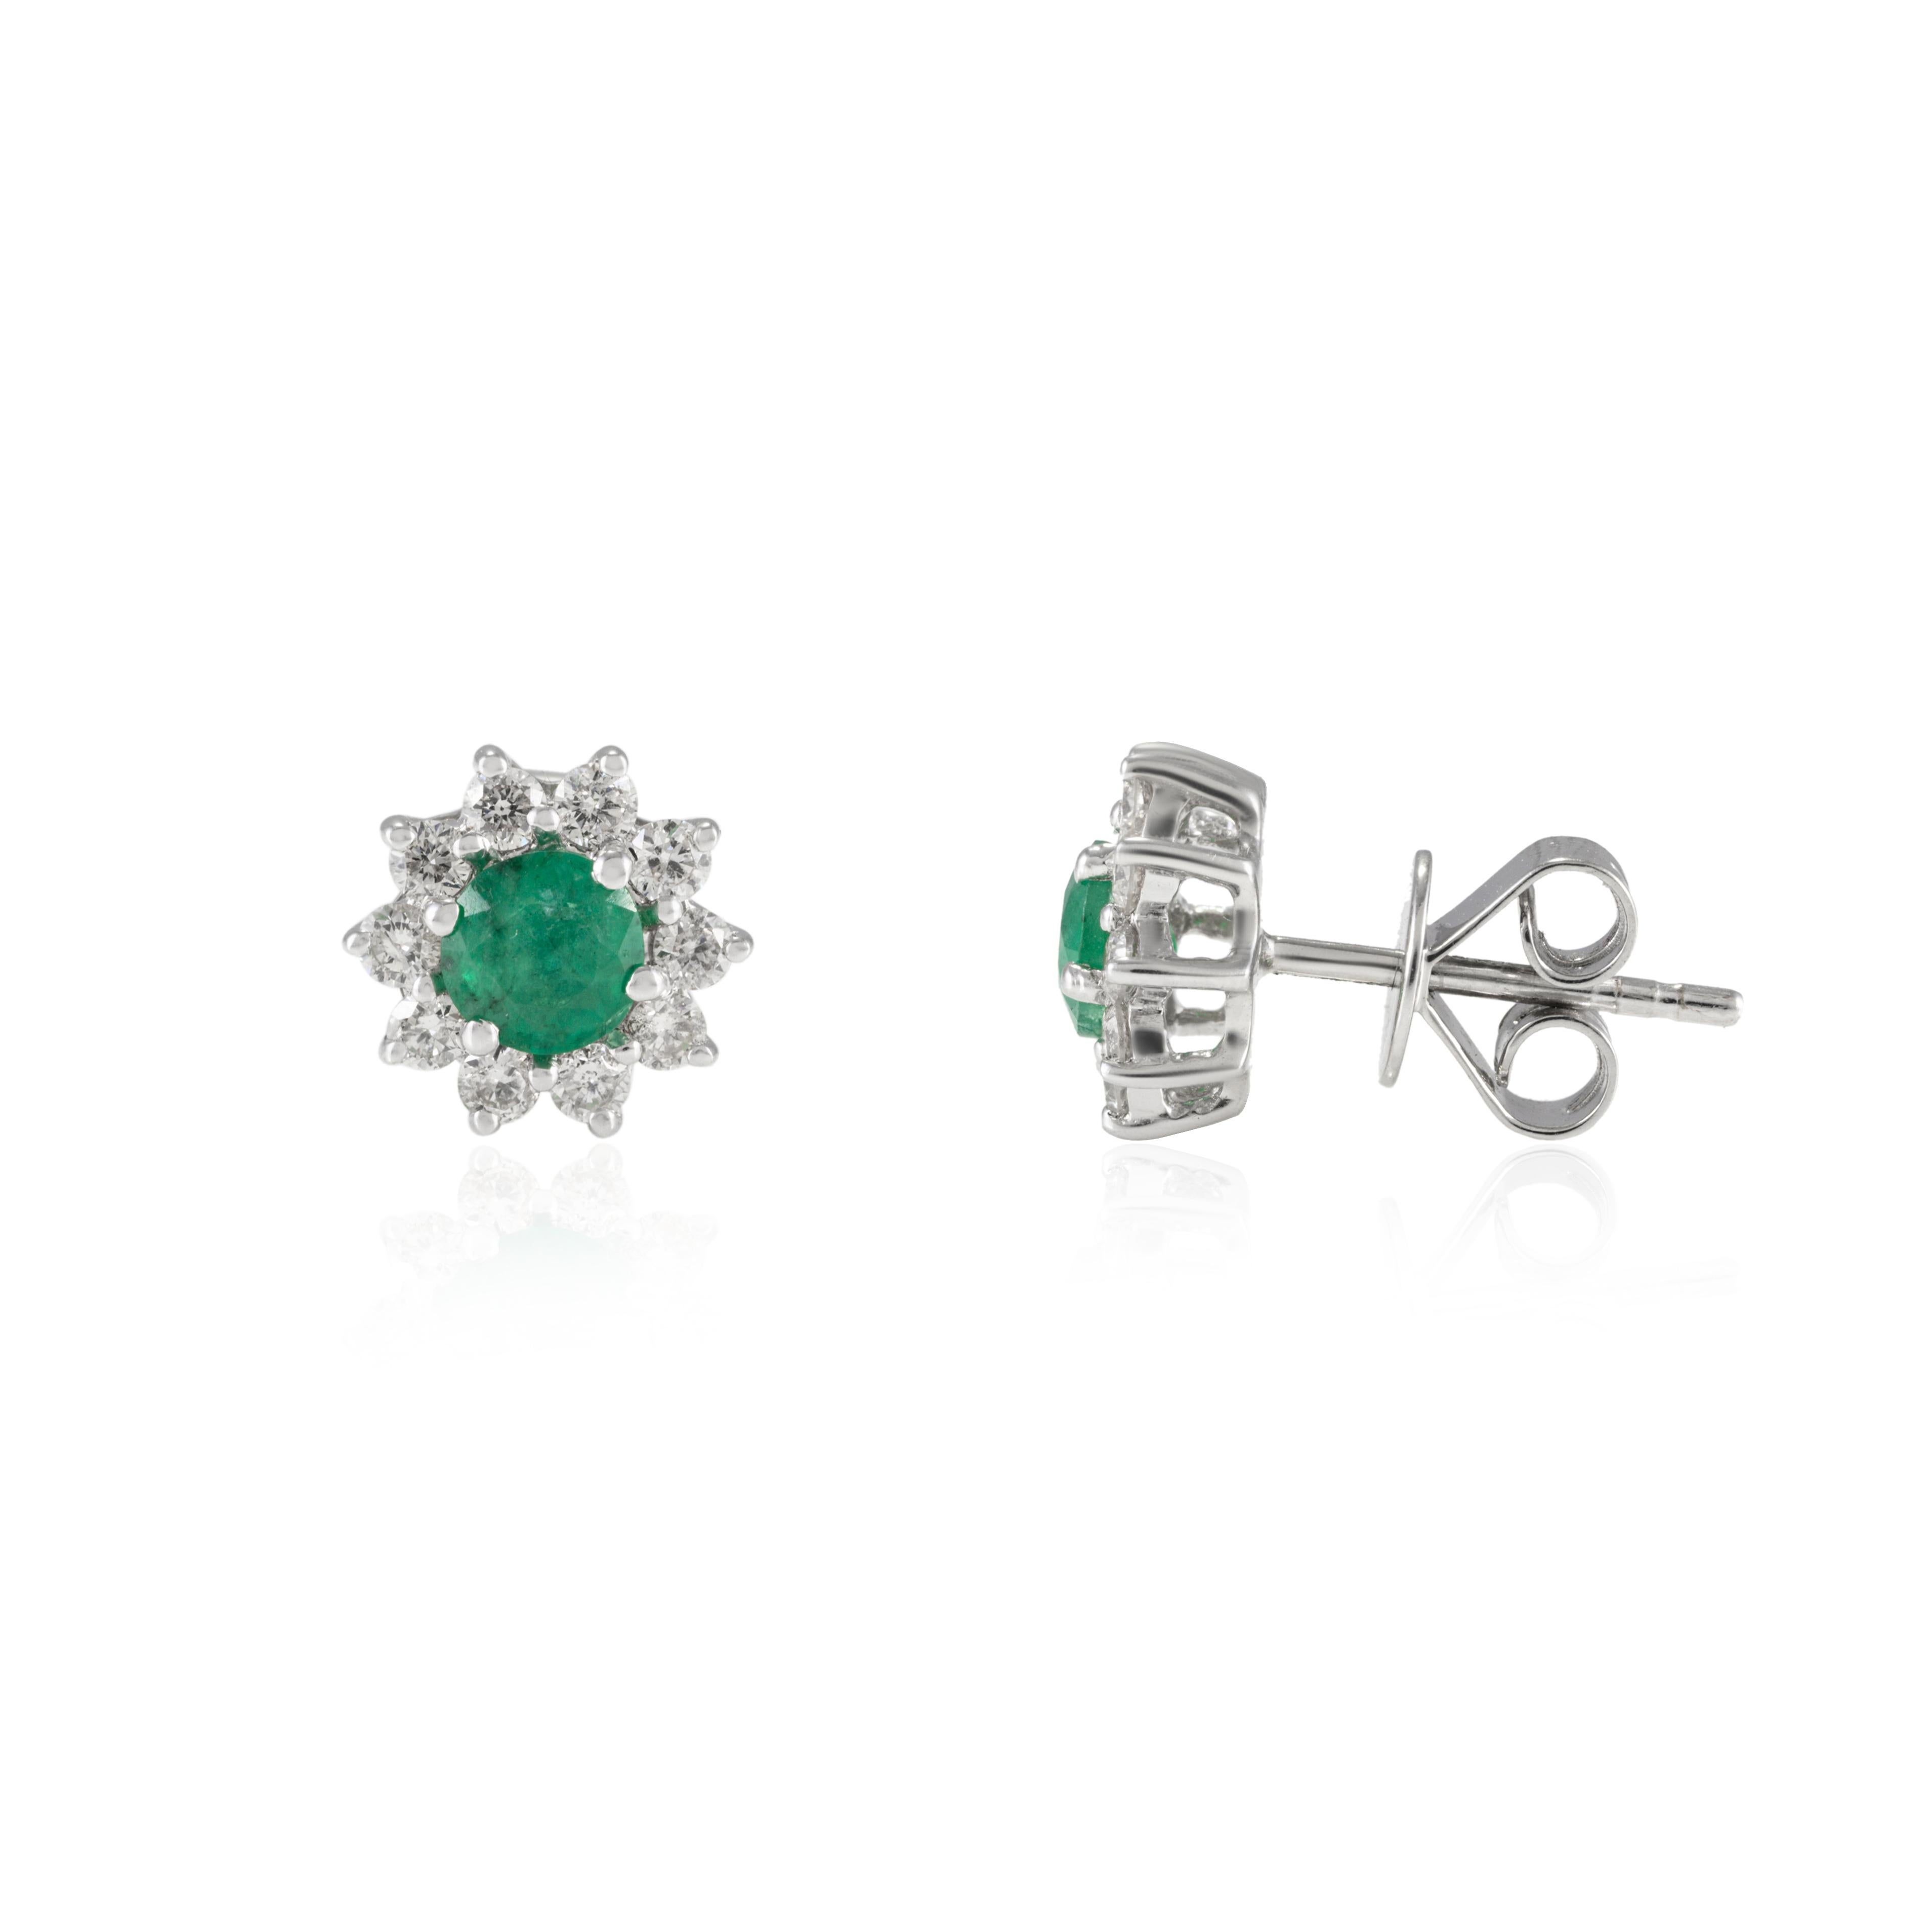 Round Cut Emerald and Diamond Halo Stud Earrings in 18K Gold to make a statement with your look. You shall need stud earrings to make a statement with your look. These earrings create a sparkling, luxurious look featuring round cut emerald.
Emerald